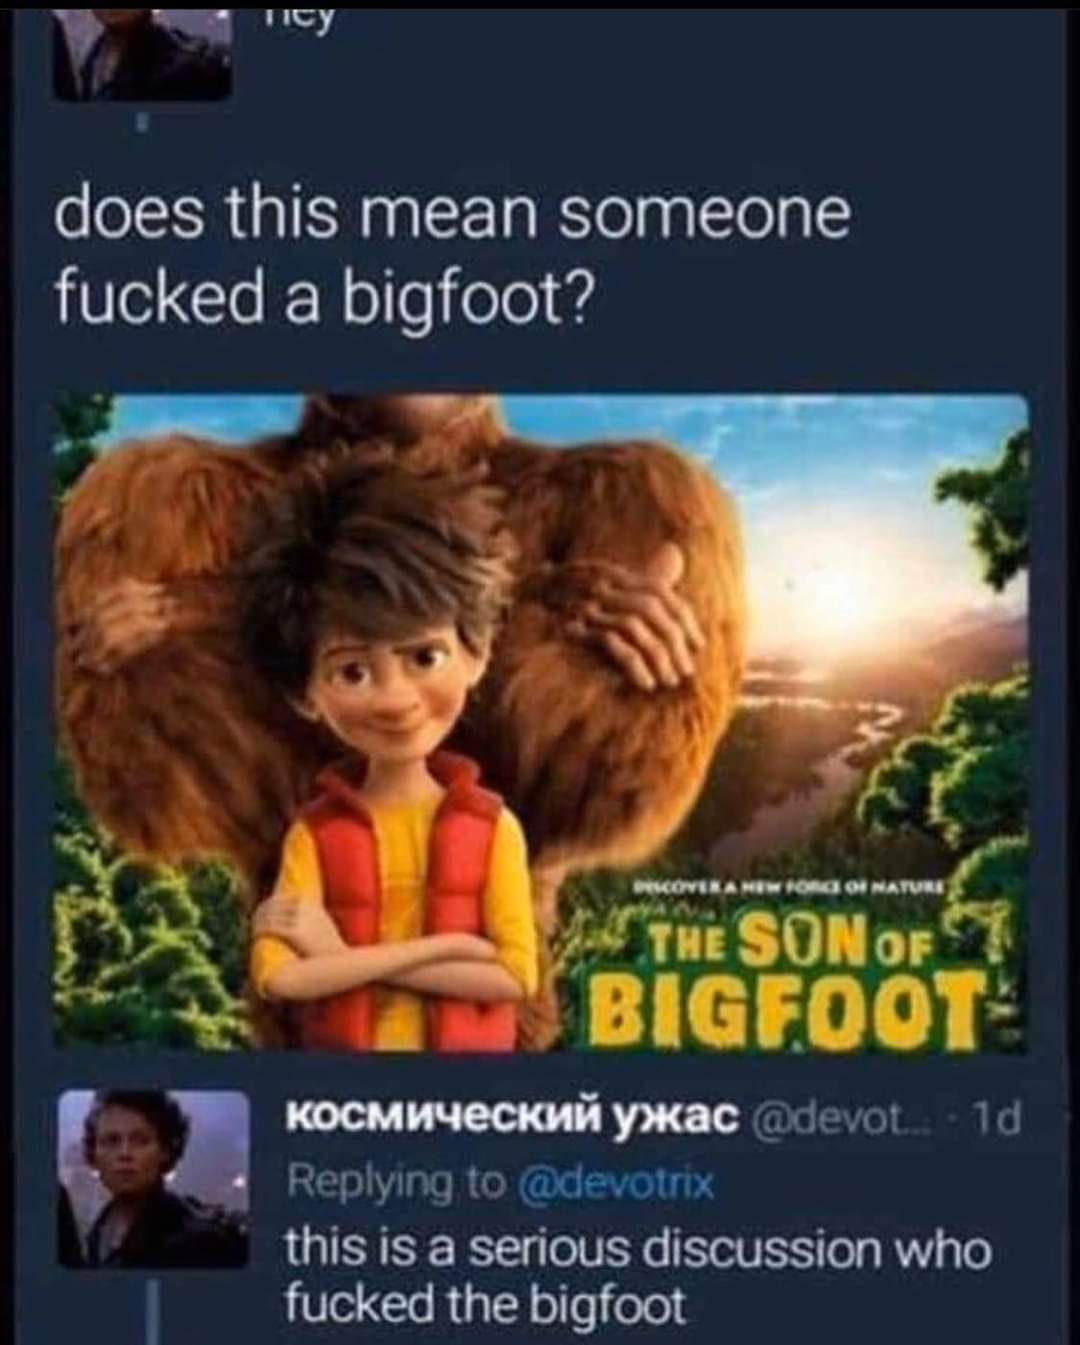 fucked the bigfoot - does this mean someone fucked a bigfoot? Og Of Naturi The Son Of Bigfoots Kocmmyeckm; yskac ... 10 this is a serious discussion who fucked the bigfoot